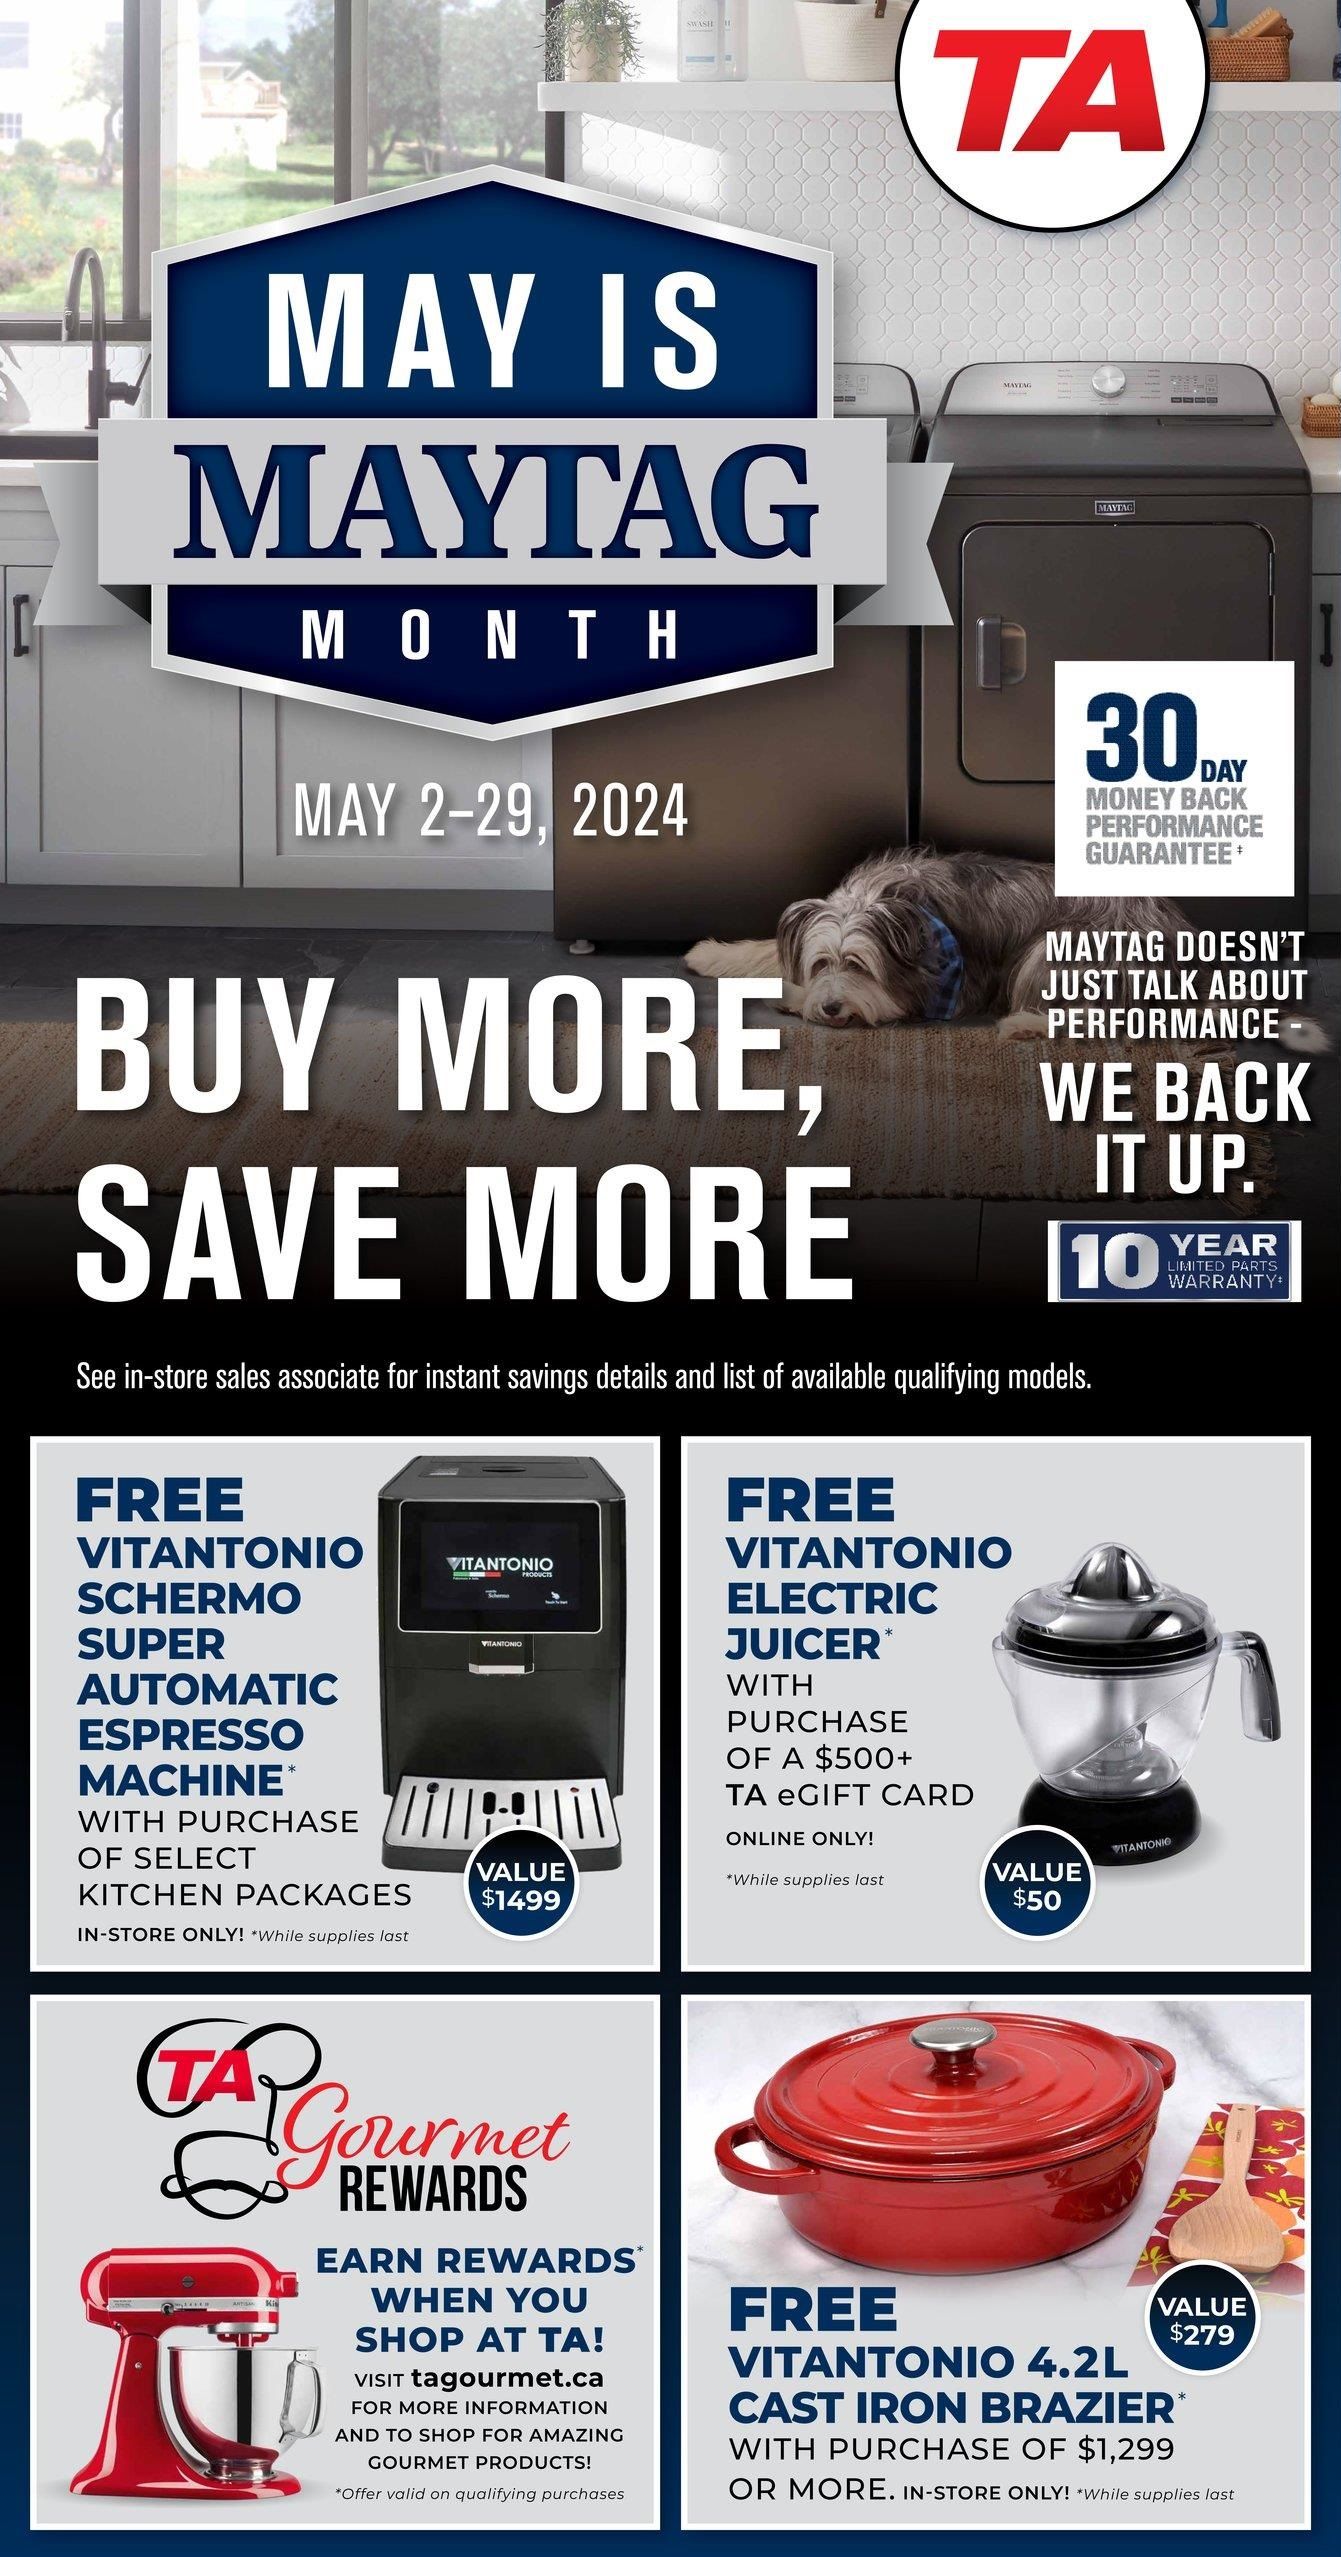 TA Appliance - Monthly Specials